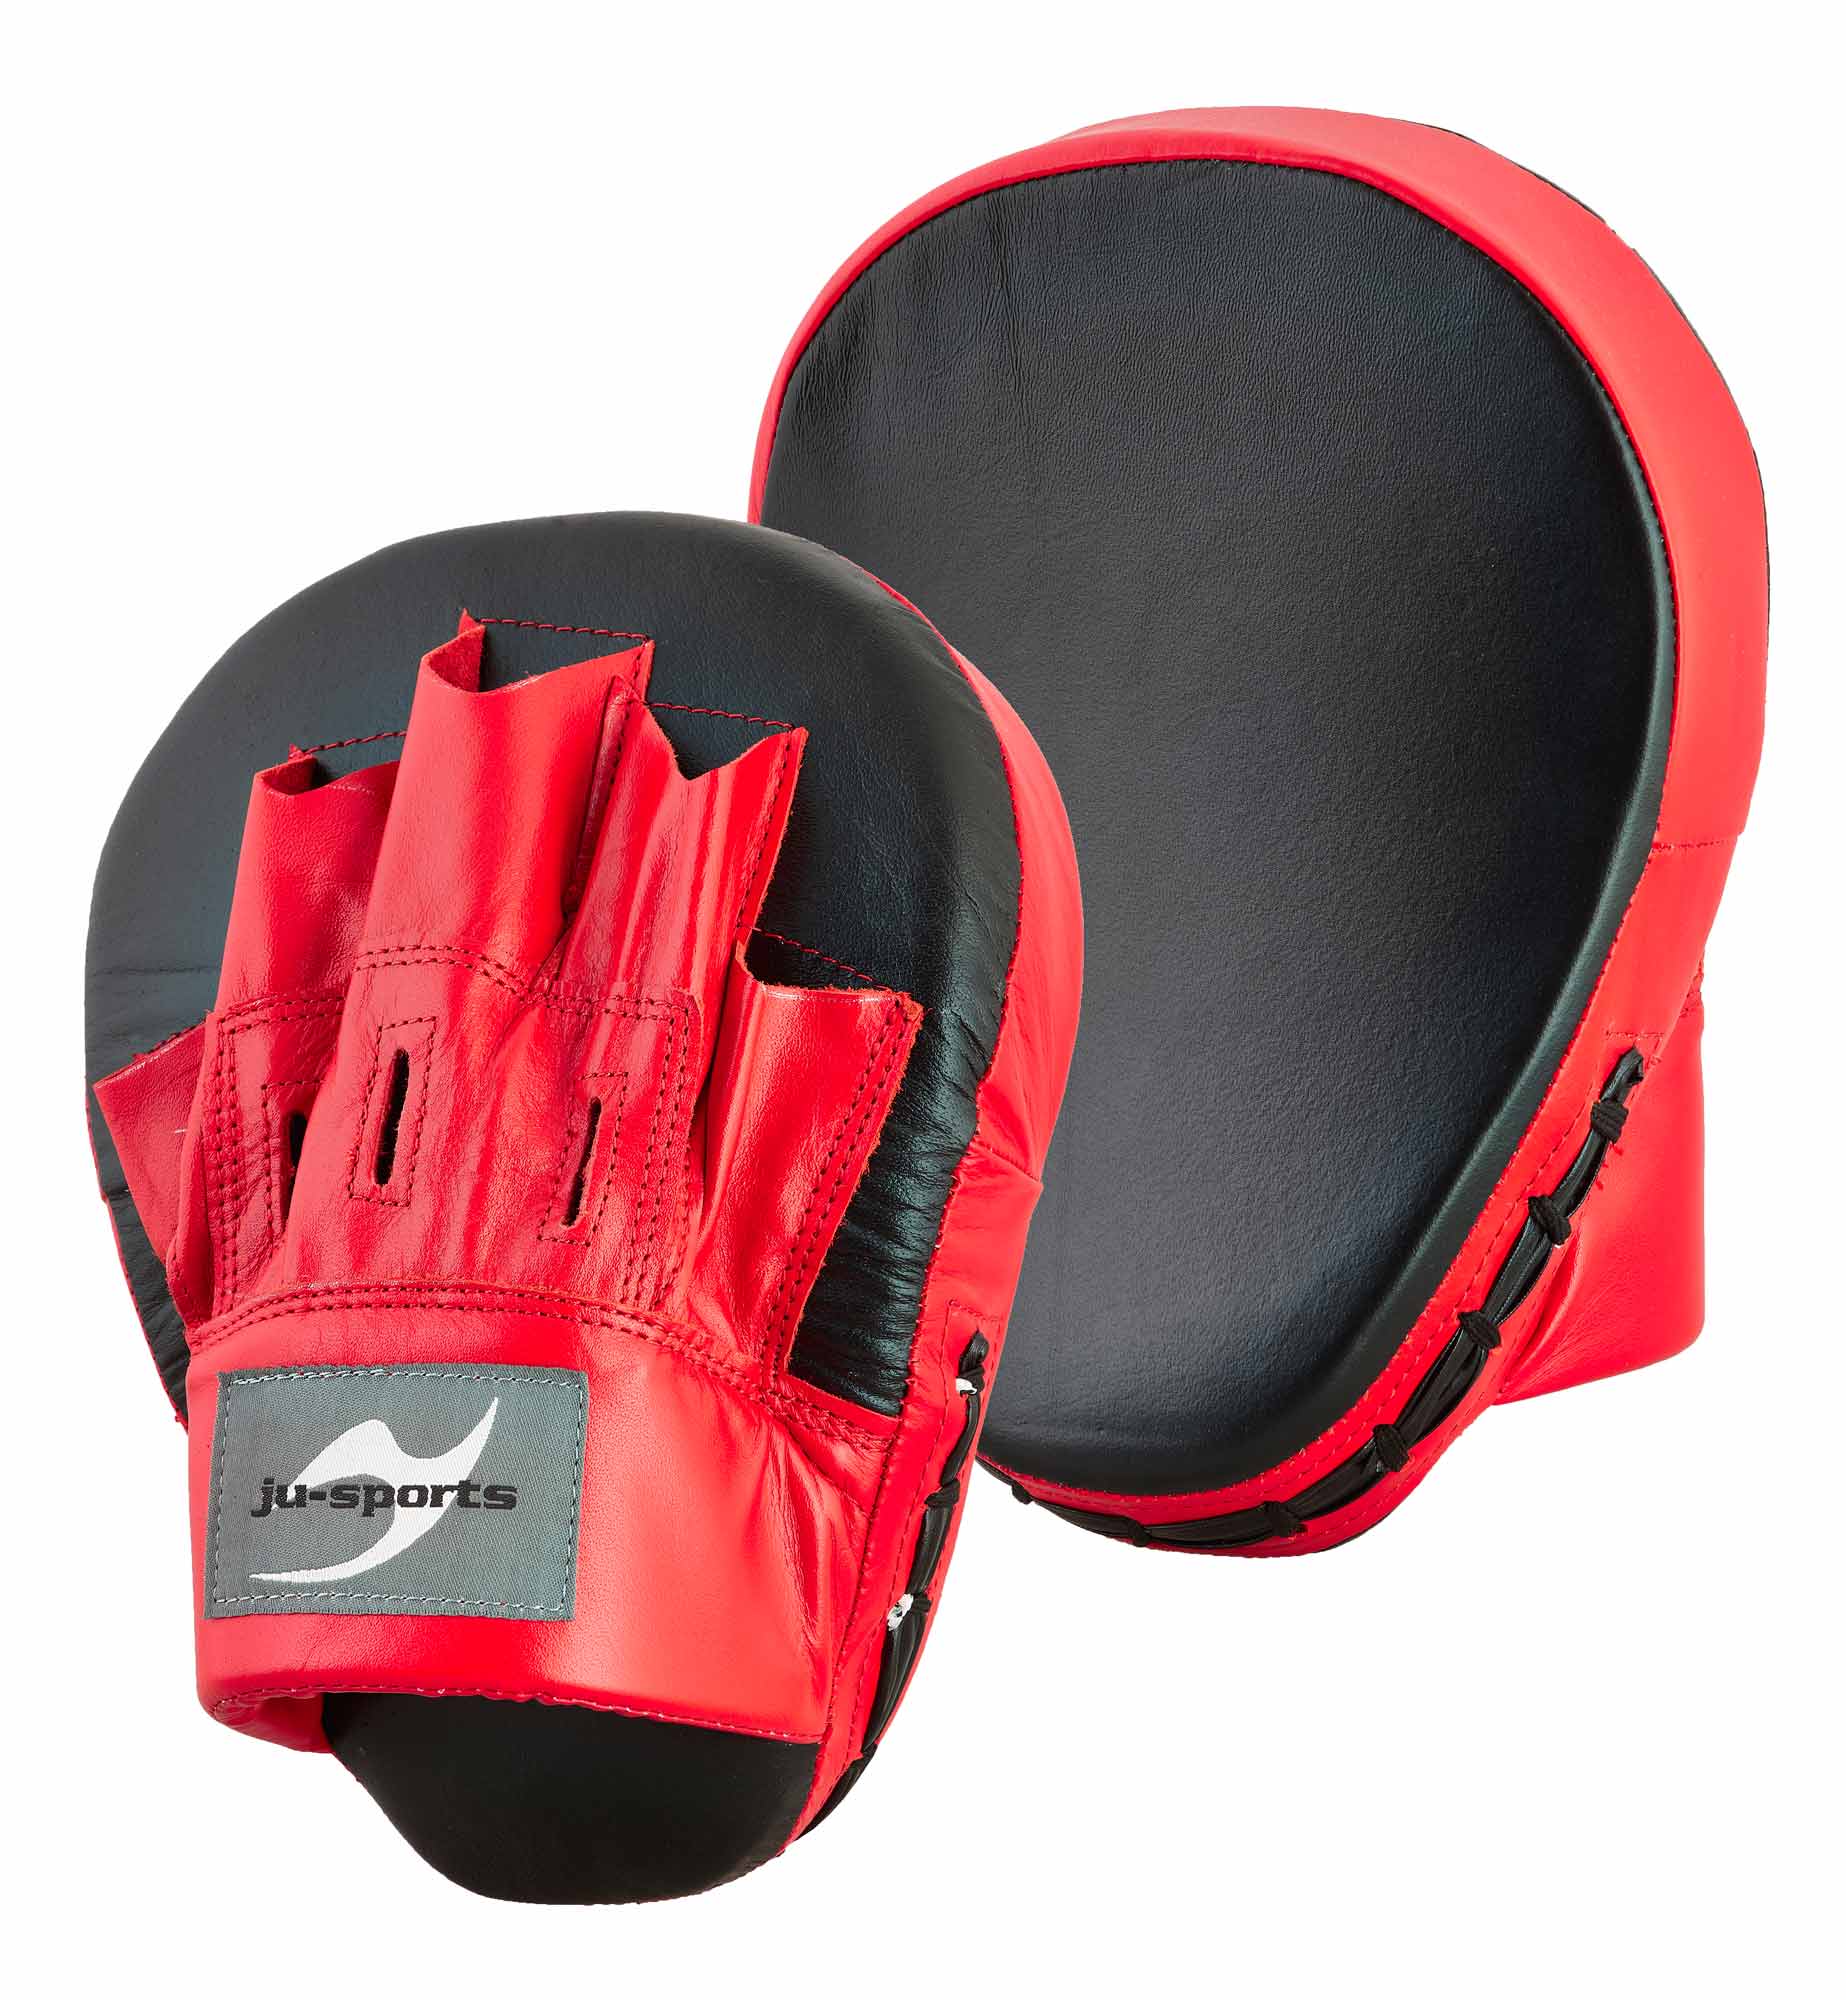 Ju-Sports Curved Focus Mitts Leather